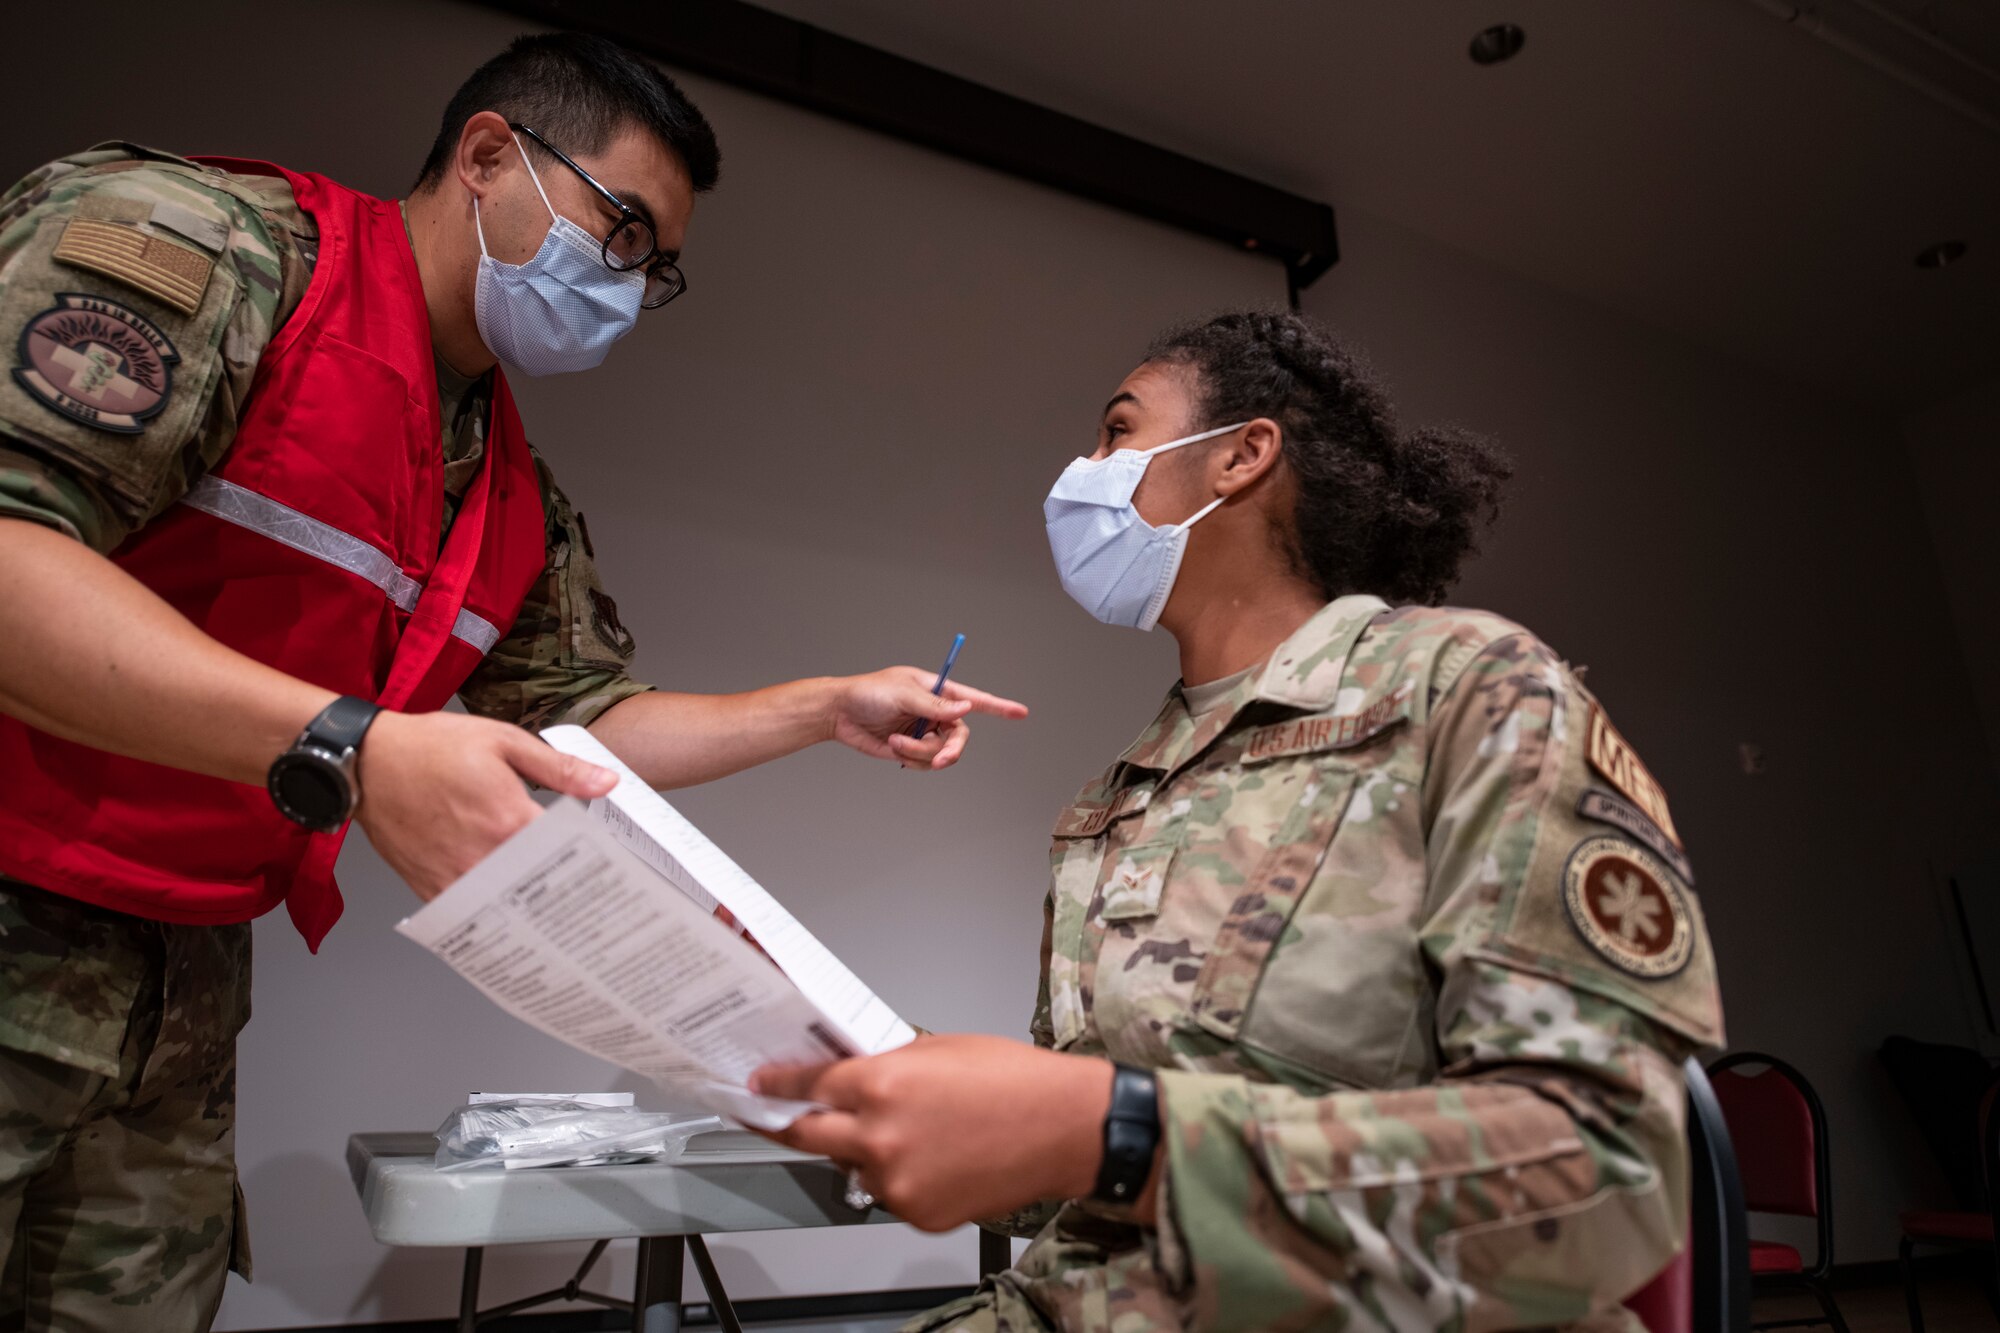 Capt. Mike Migita, 9th Healthcare Operations Squadron pediatrician, provides information about the anthrax vaccine to Airman 1st Class Erika Claridy, 9th Operational Medical Readiness Squadron aerospace medical technician, Aug. 5, 2021, at Beale Air Force Base, California.